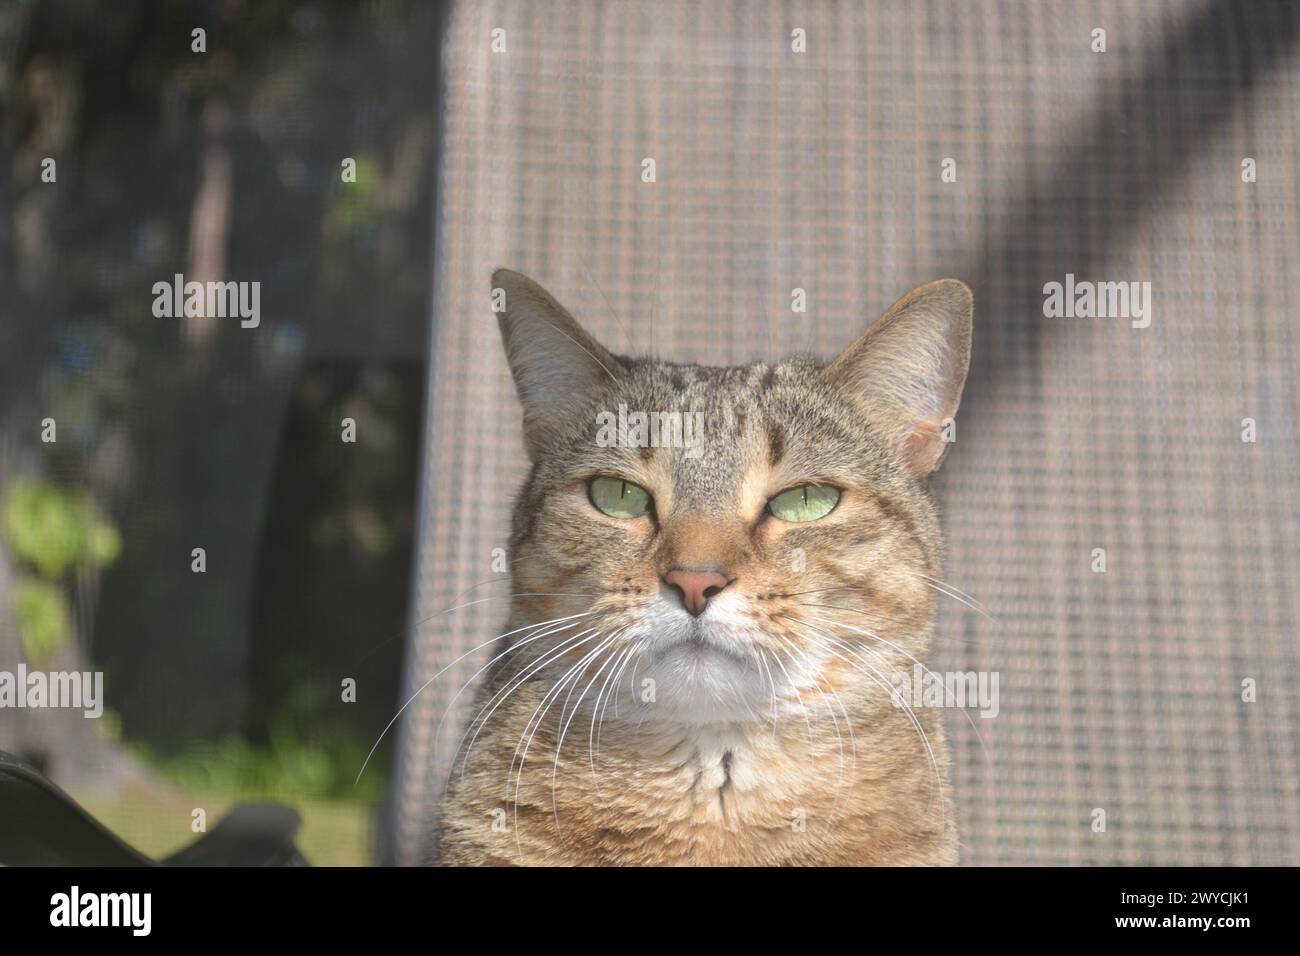 A brown Tabby cat, sporting a grumpy expression and bright green eyes, sits atop a brown woven chair within a screened-in pool patio. Stock Photo